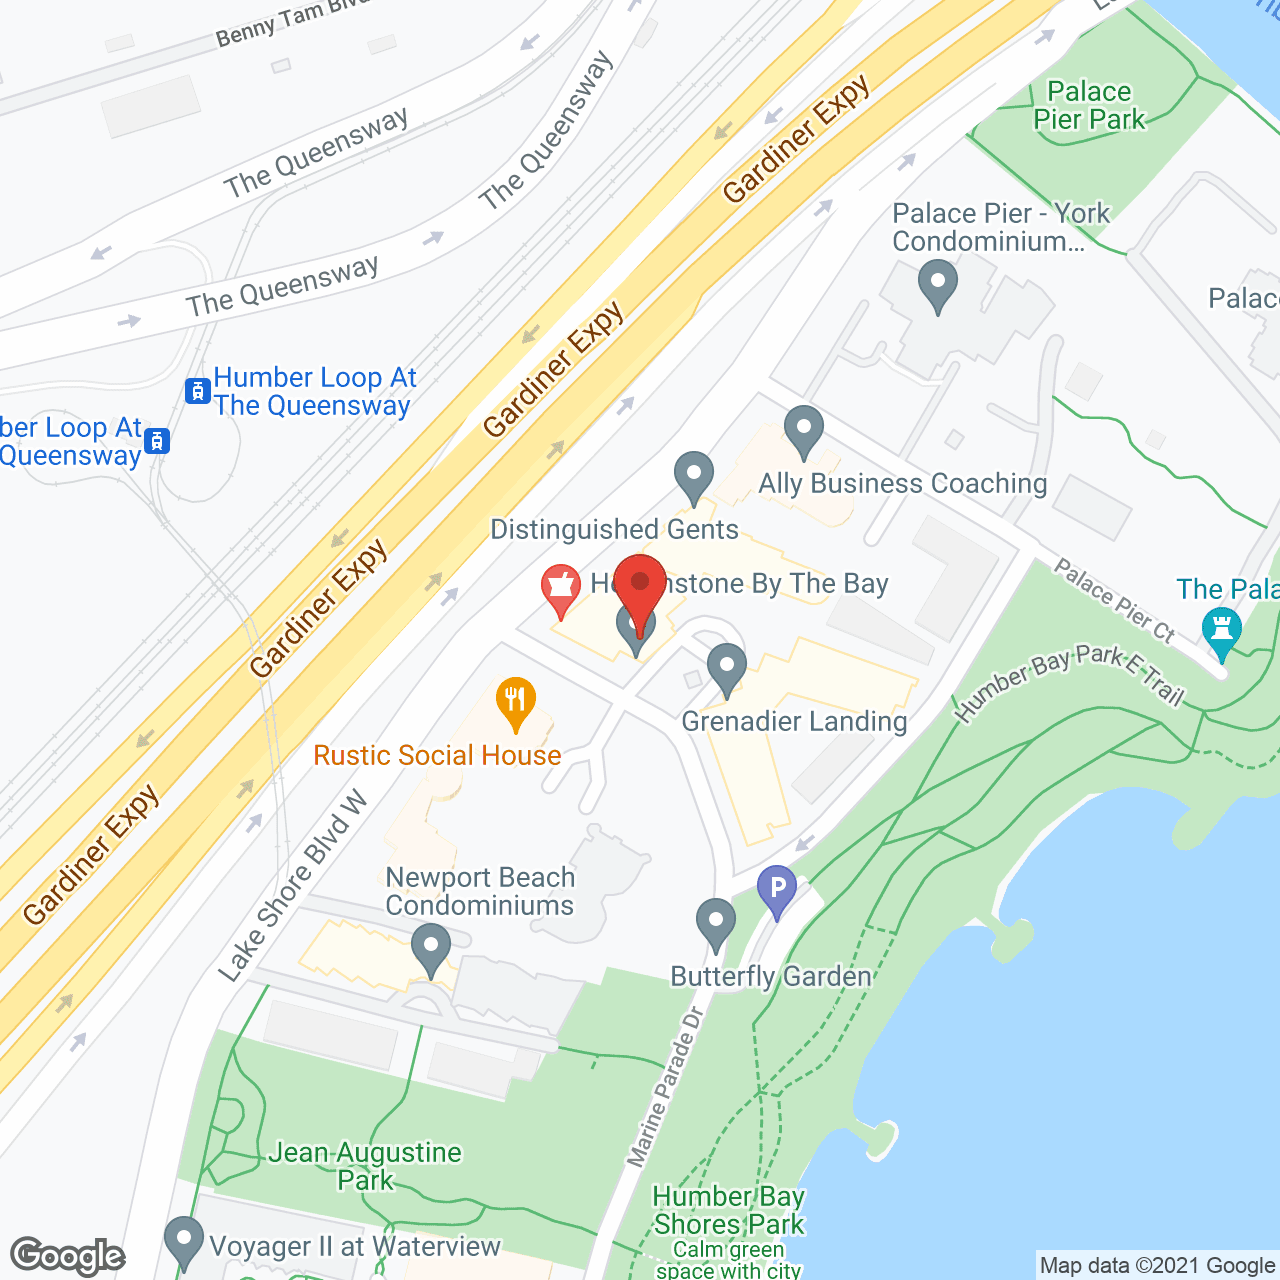 Hearthstone By The Bay in google map